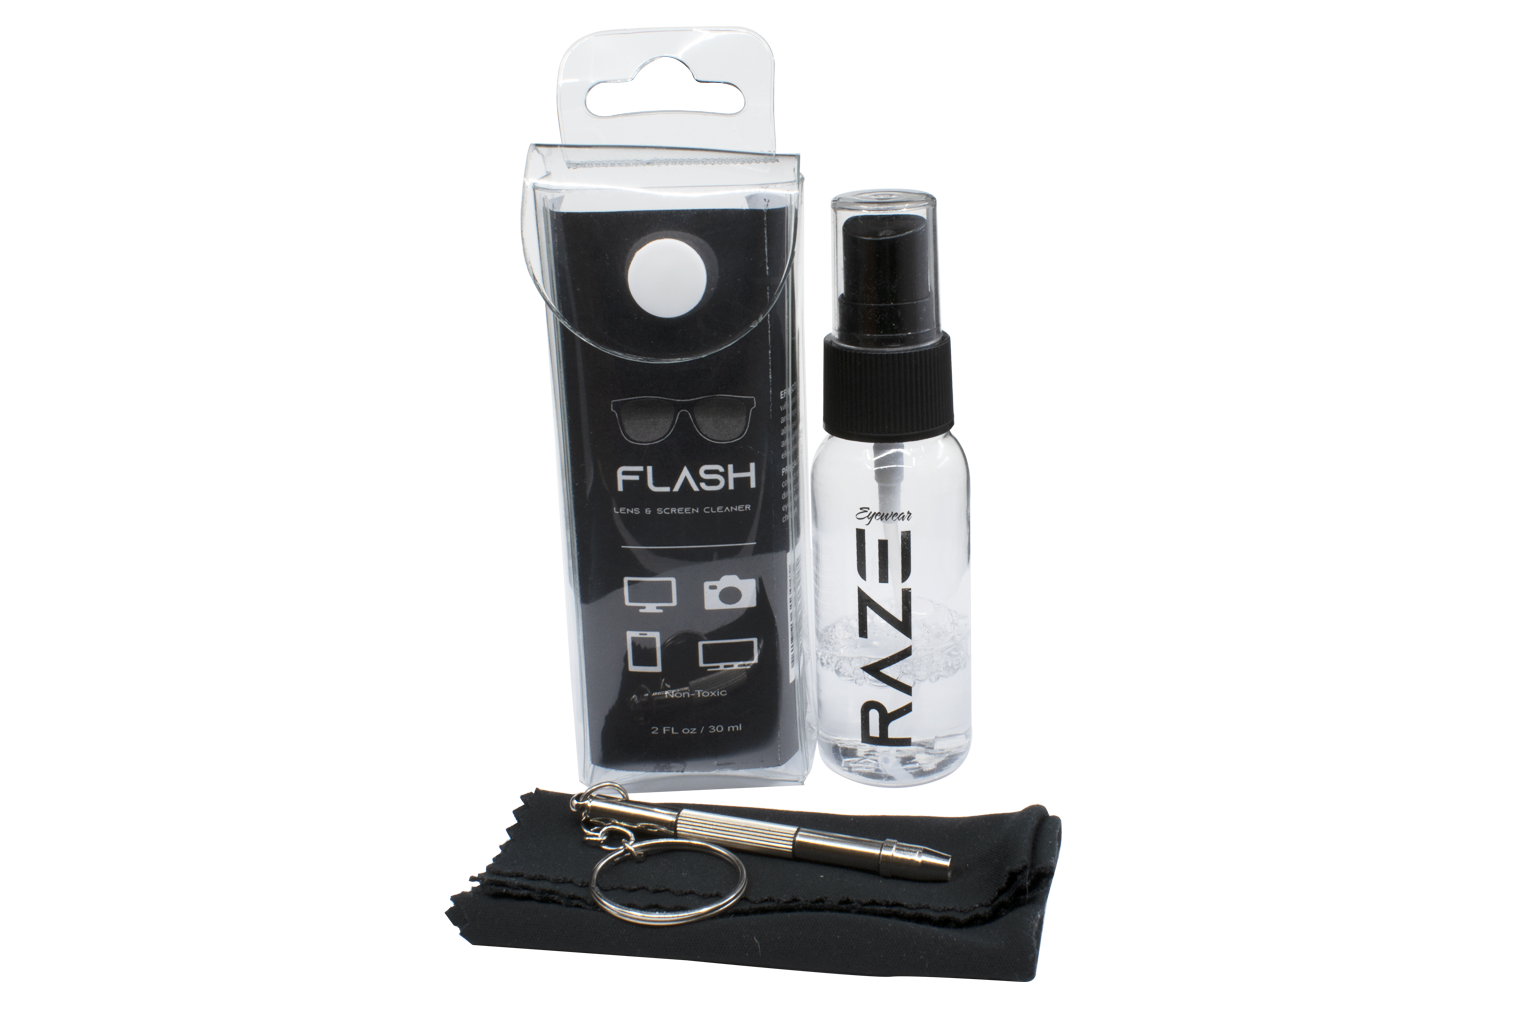 FLASH Cleaning Kit